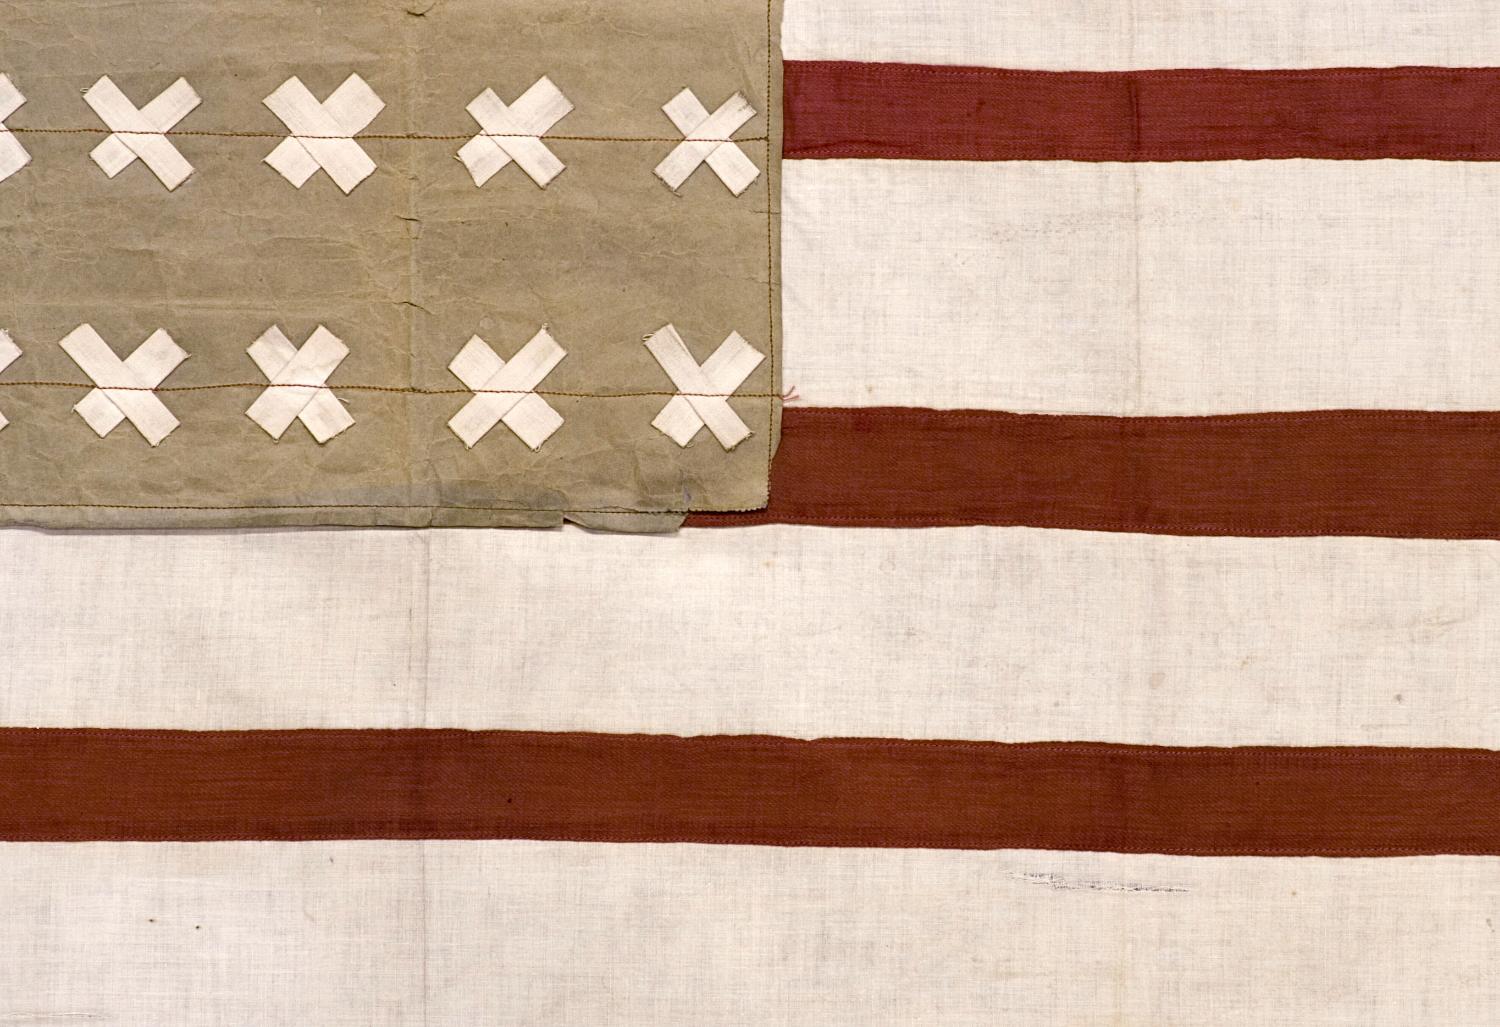 WWI, BELGIAN-MADE VERSION OF THE STARS & STRIPES WITH 30 CROSS-HATCH STARS, USED TO WELCOME U.S. SOLDIERS INTO THE CITY OF VIRTON, BELGIUM IN 1918, FOLLOWING ITS LIBERATION FROM GERMAN OCCUPATION

This 30 star flag was homemade by a Belgian citizen